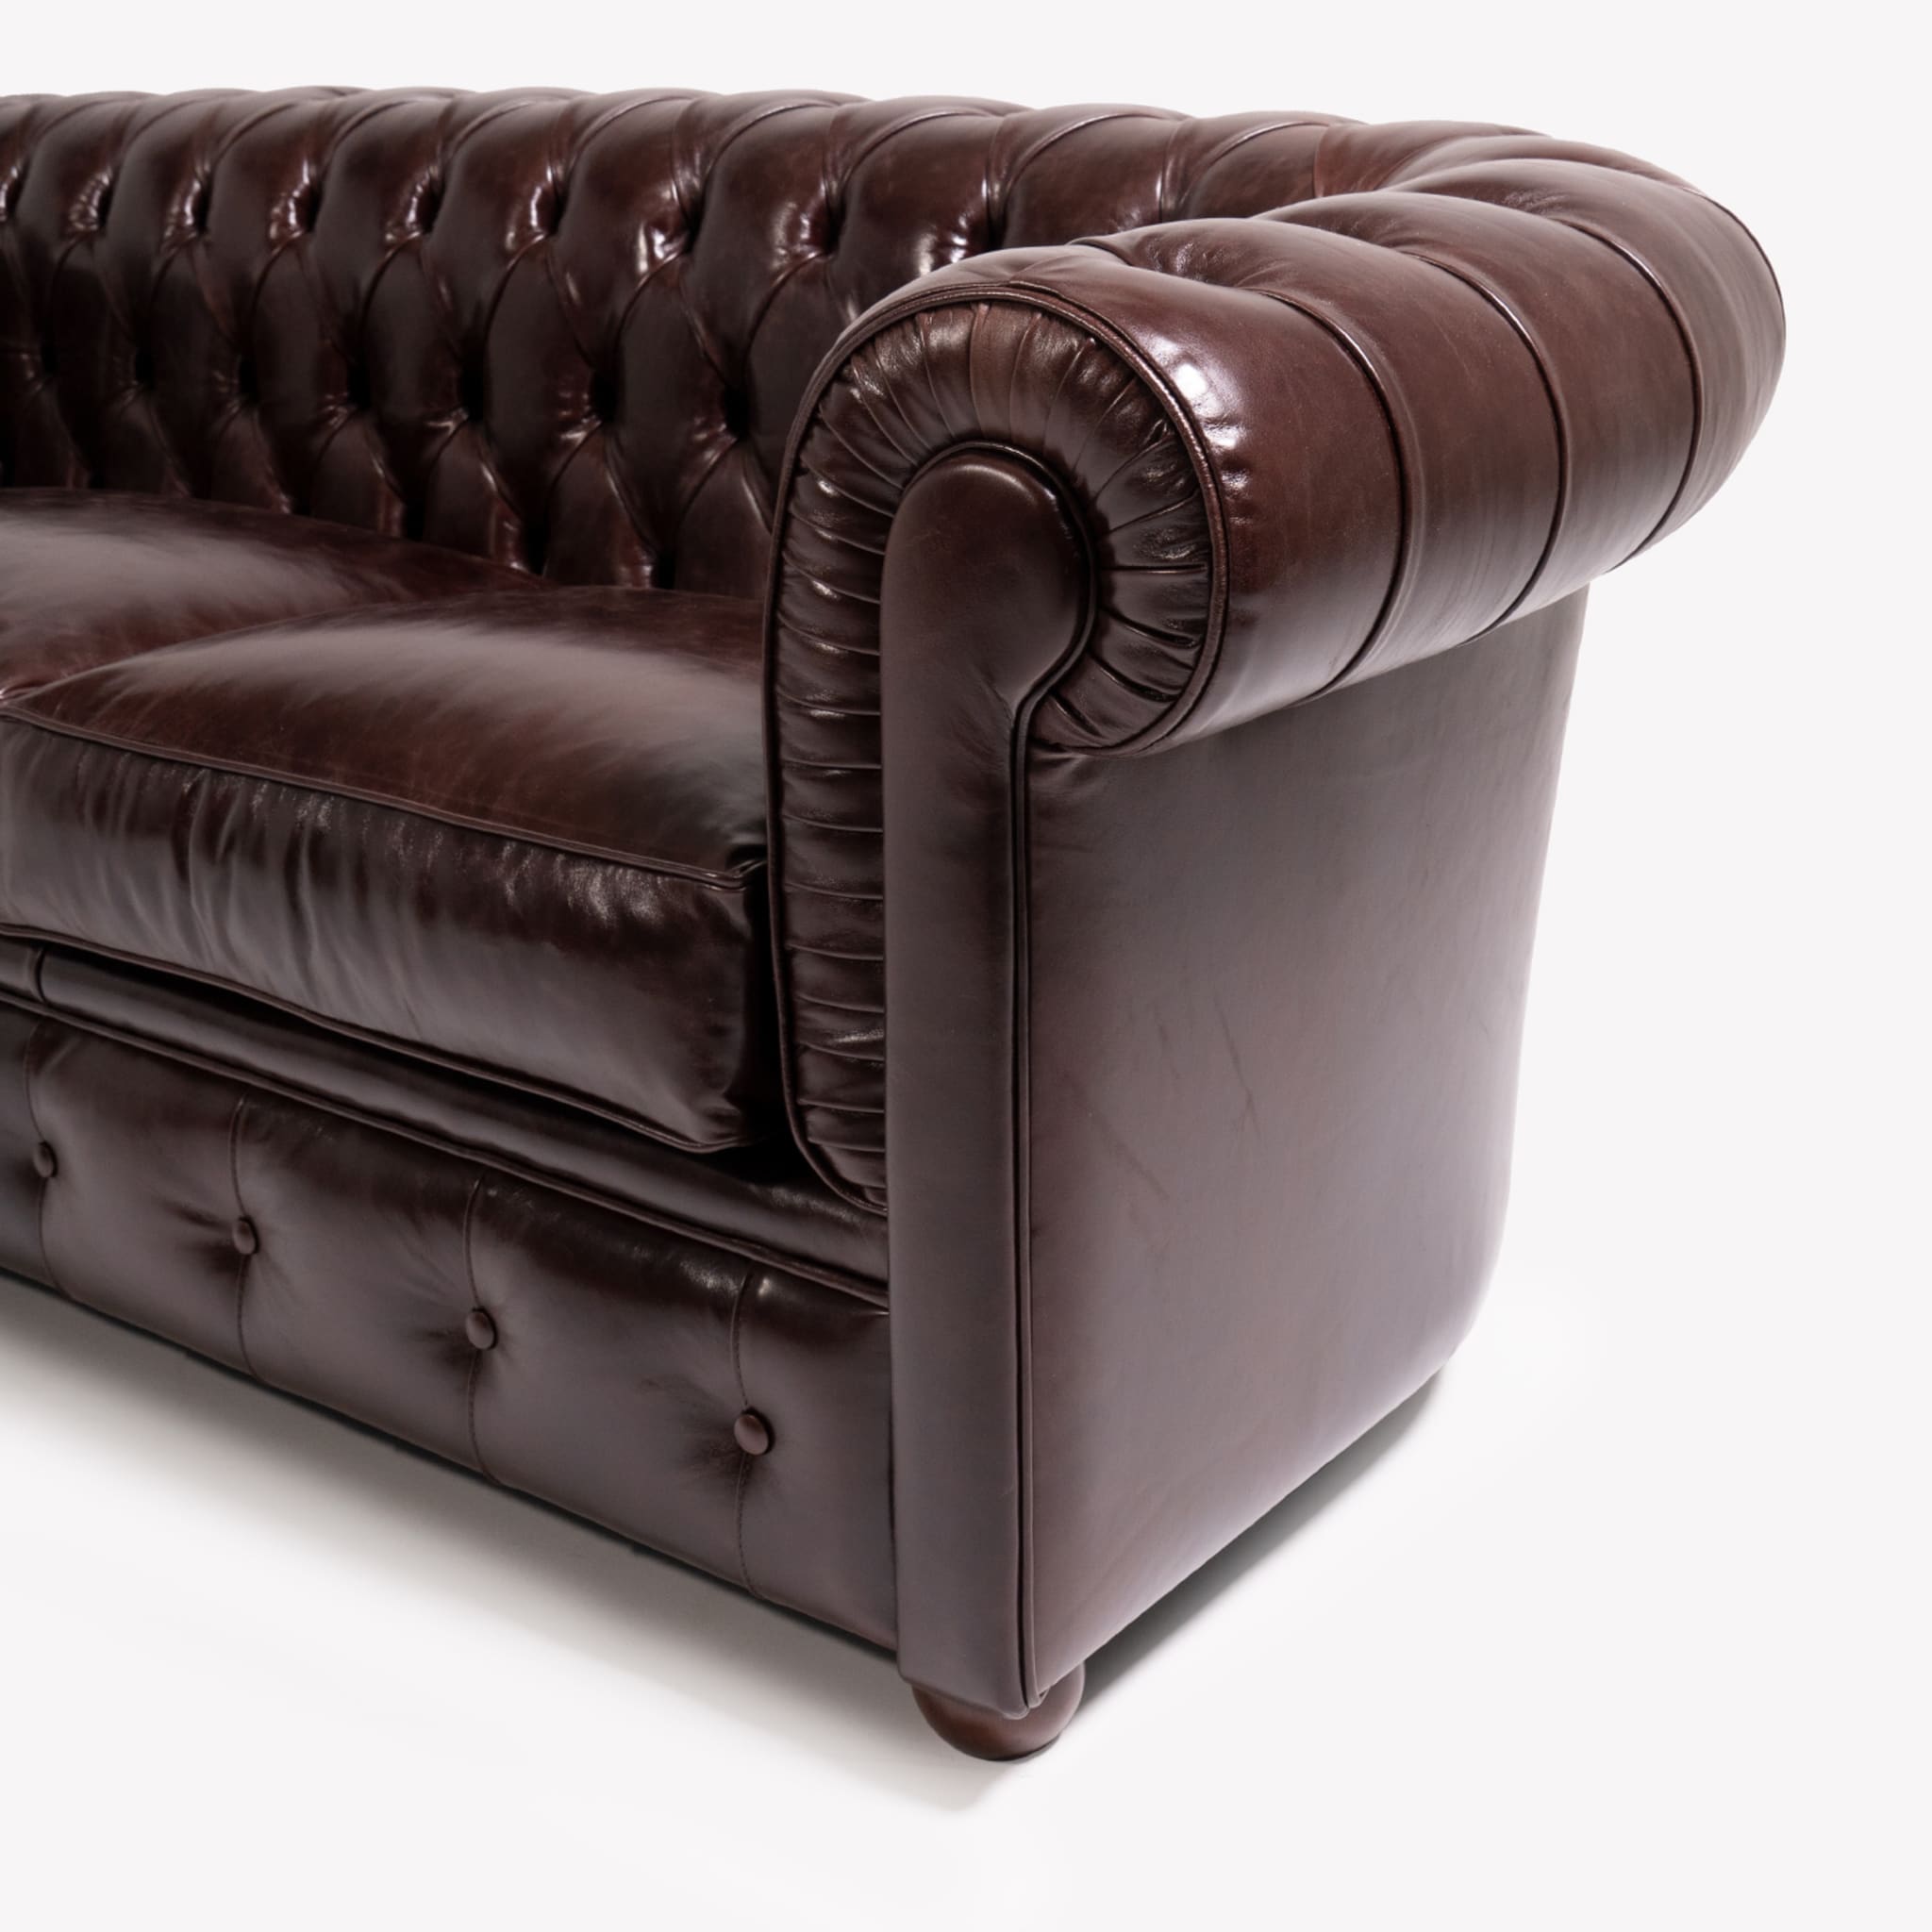 Chesterfield Brown Leather 3-Seater Sofa - Alternative view 2